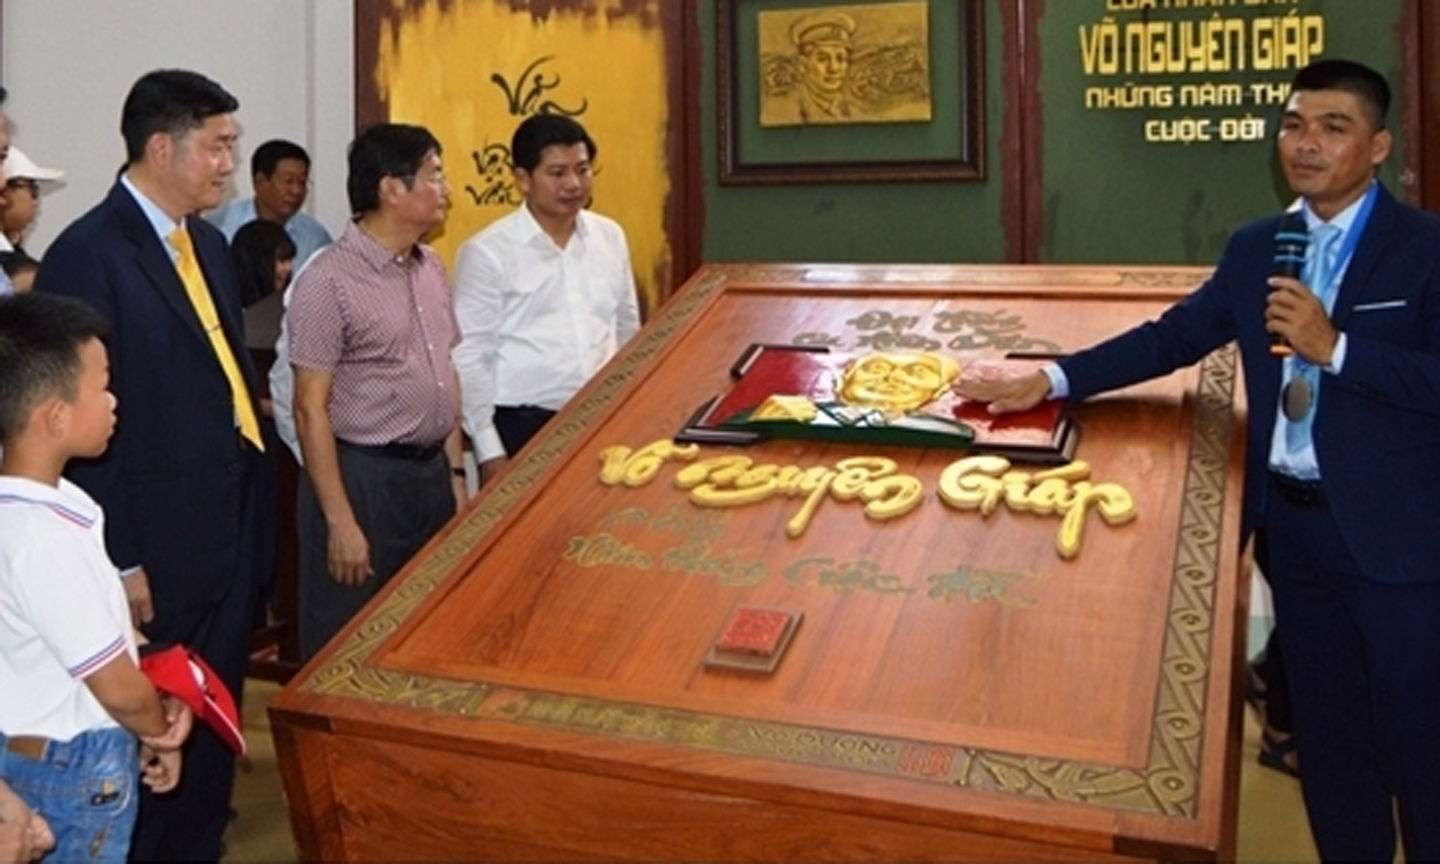  The calligraphy book on General Vo Nguyen Giap (Photo: NDO)